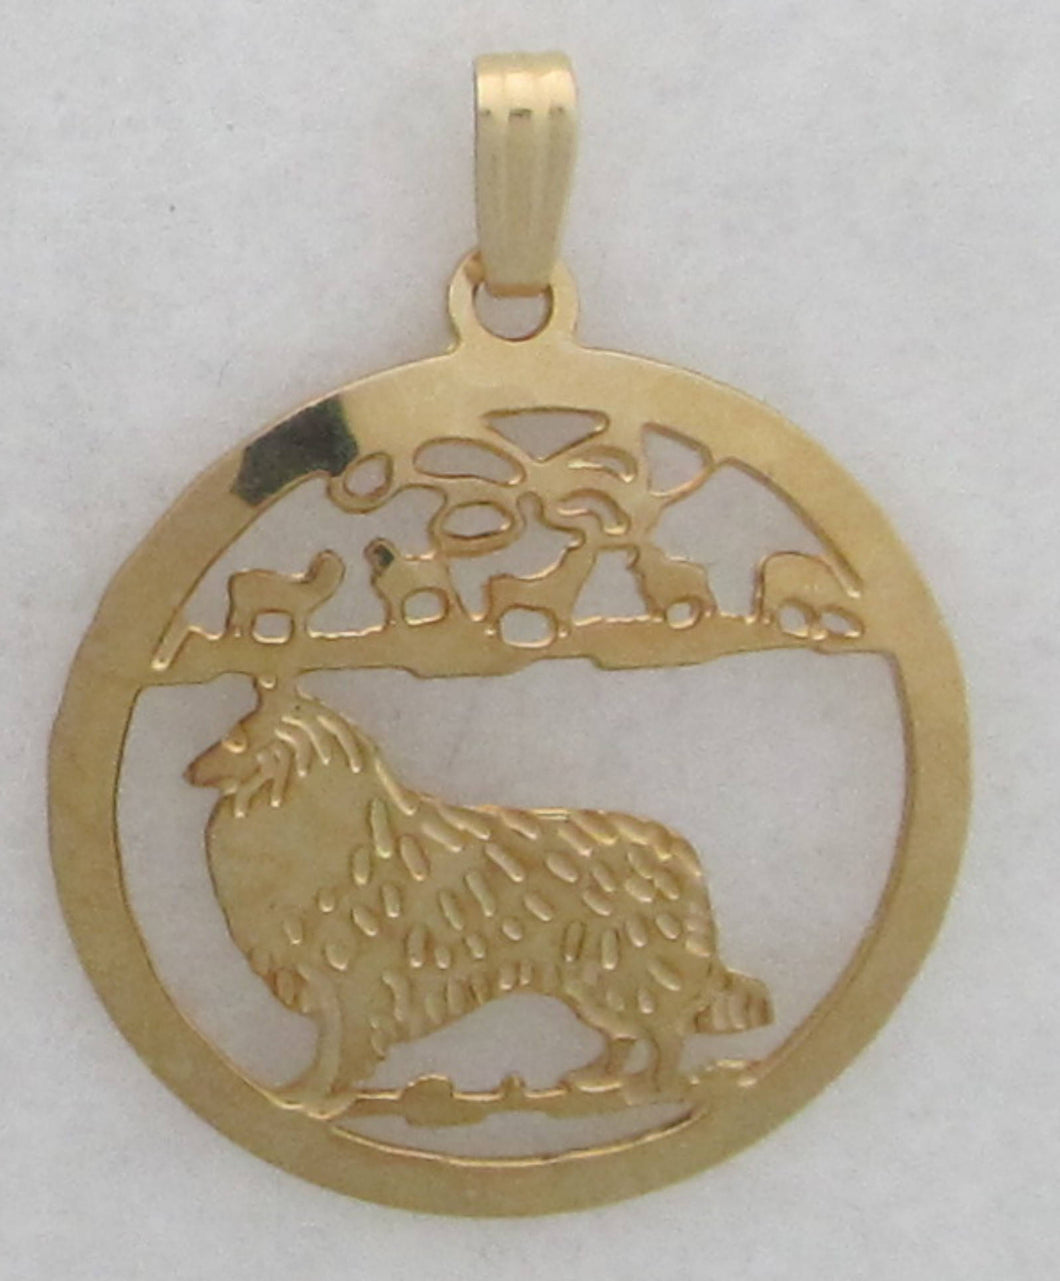 Collie (Rough) Pendant by Touchstone Dog Designs // Collie Jewelry  // Dog Breed Jewelry // AKC Breed Jewelry